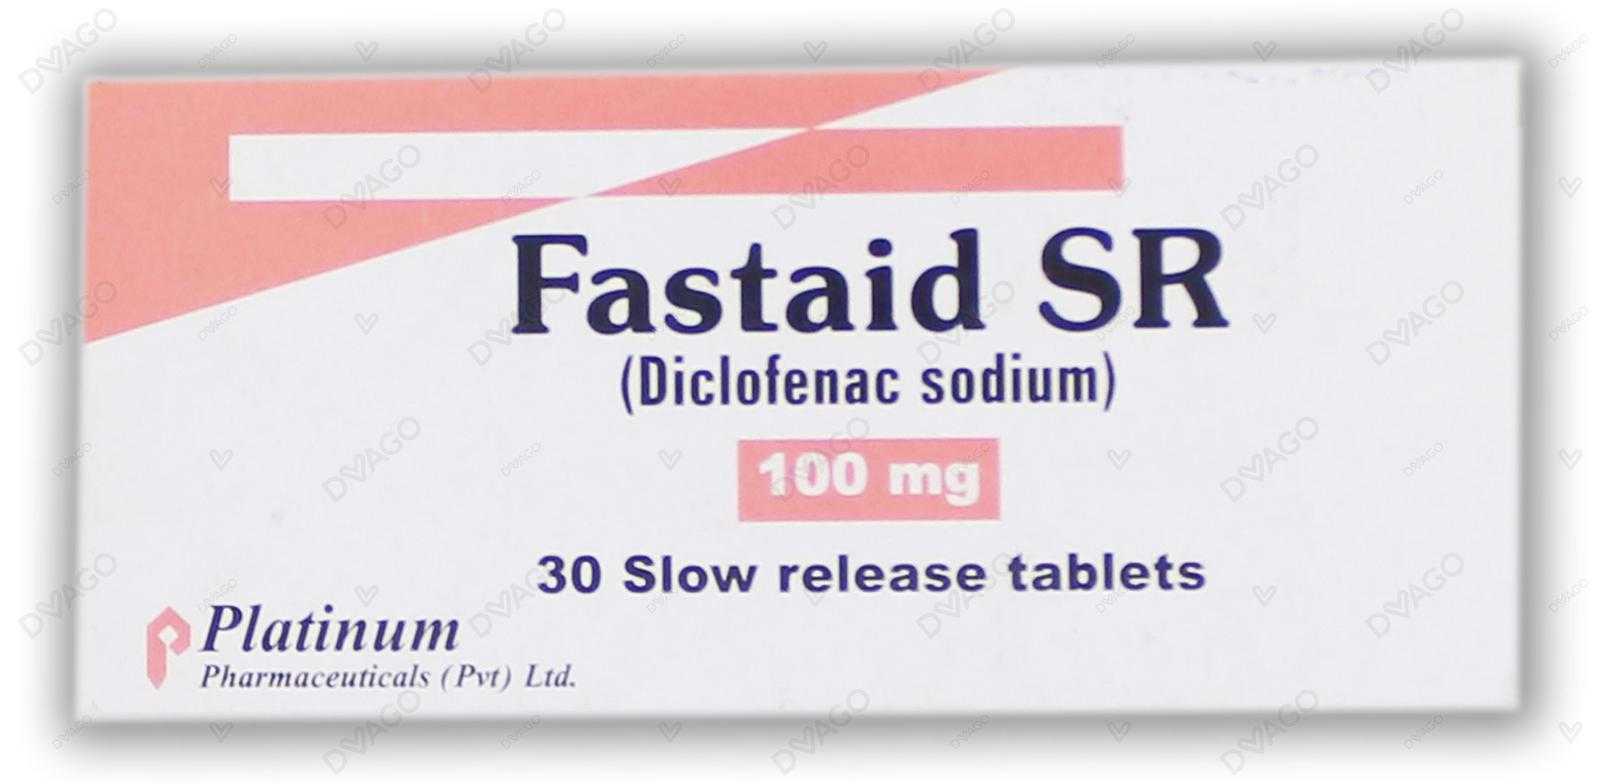 fastaid sr tablets 100mg